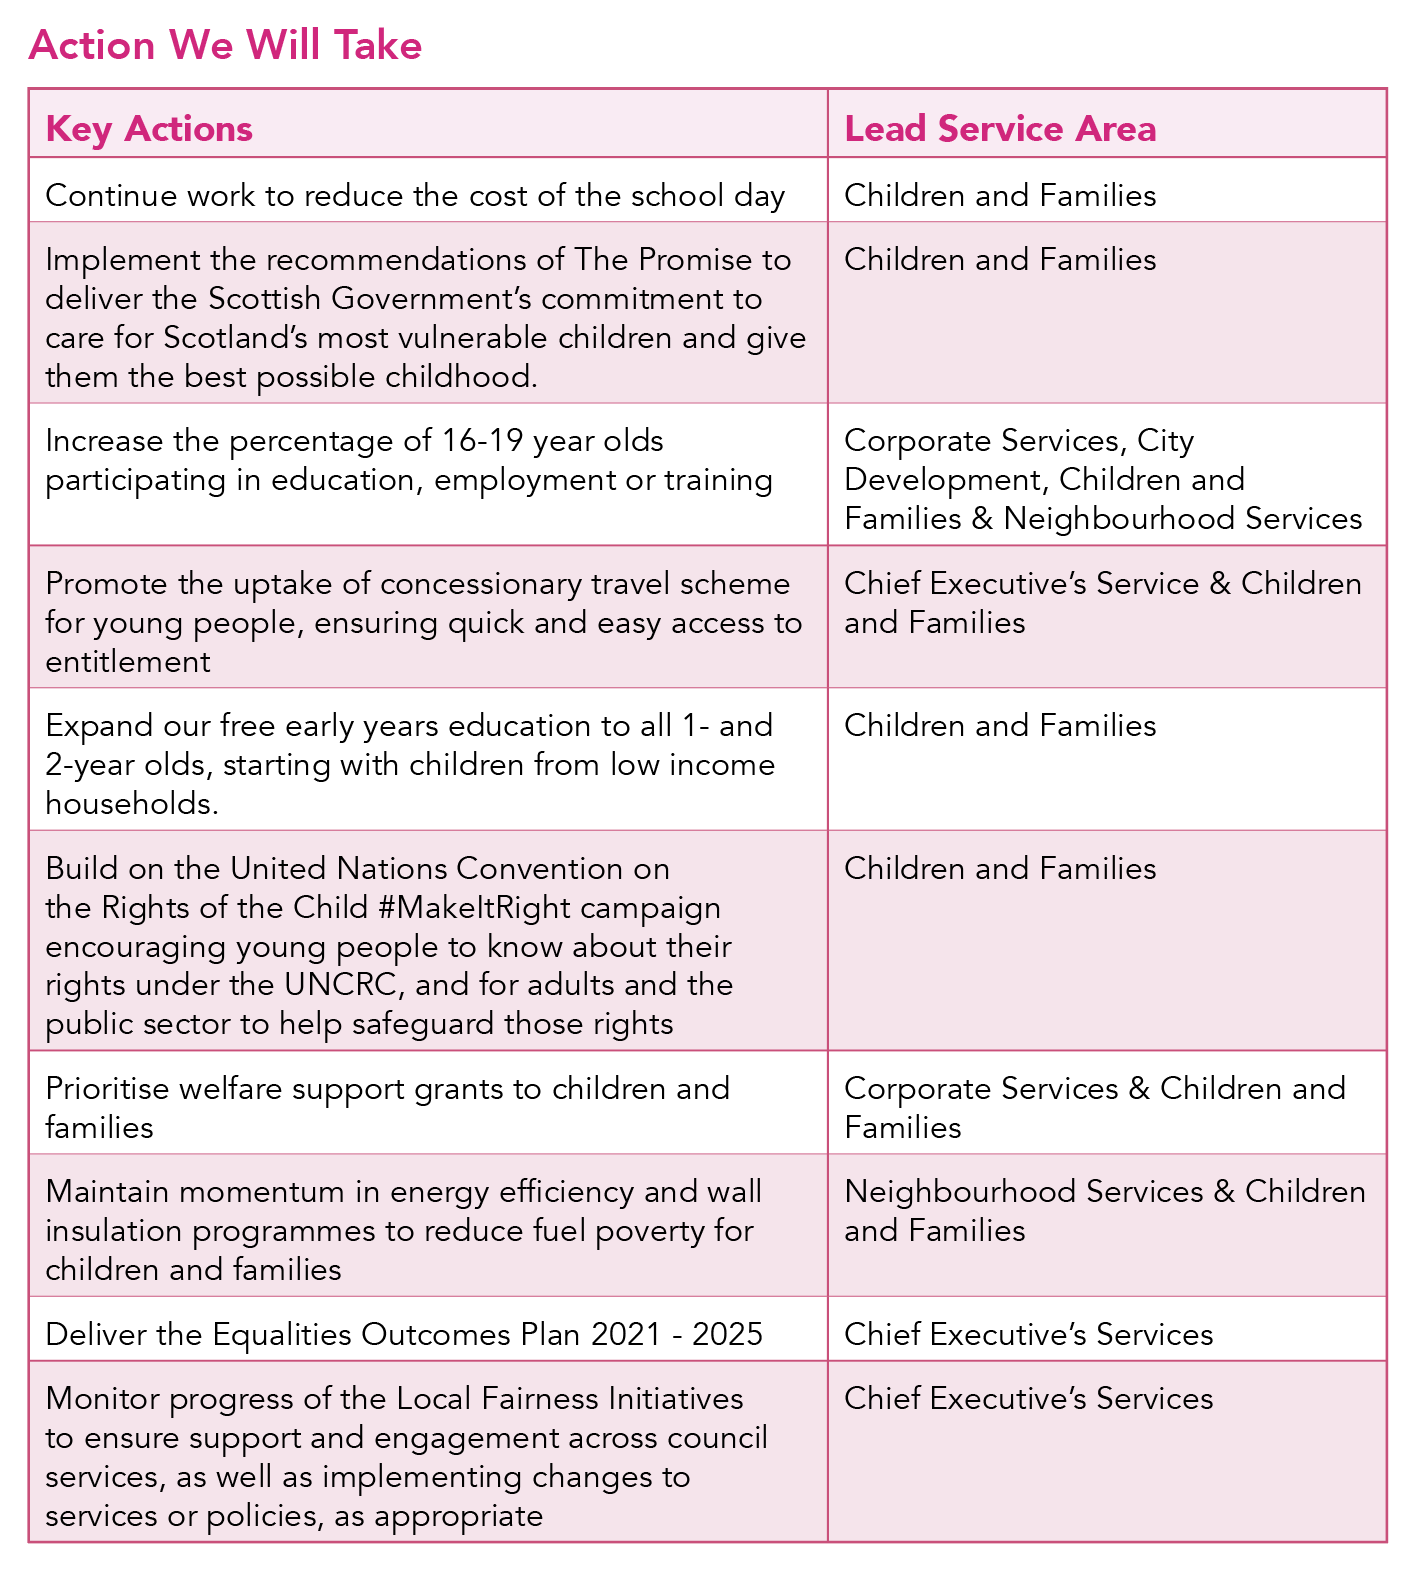 This picture shows a table of key actions and lead service areas for the Child Poverty Priority